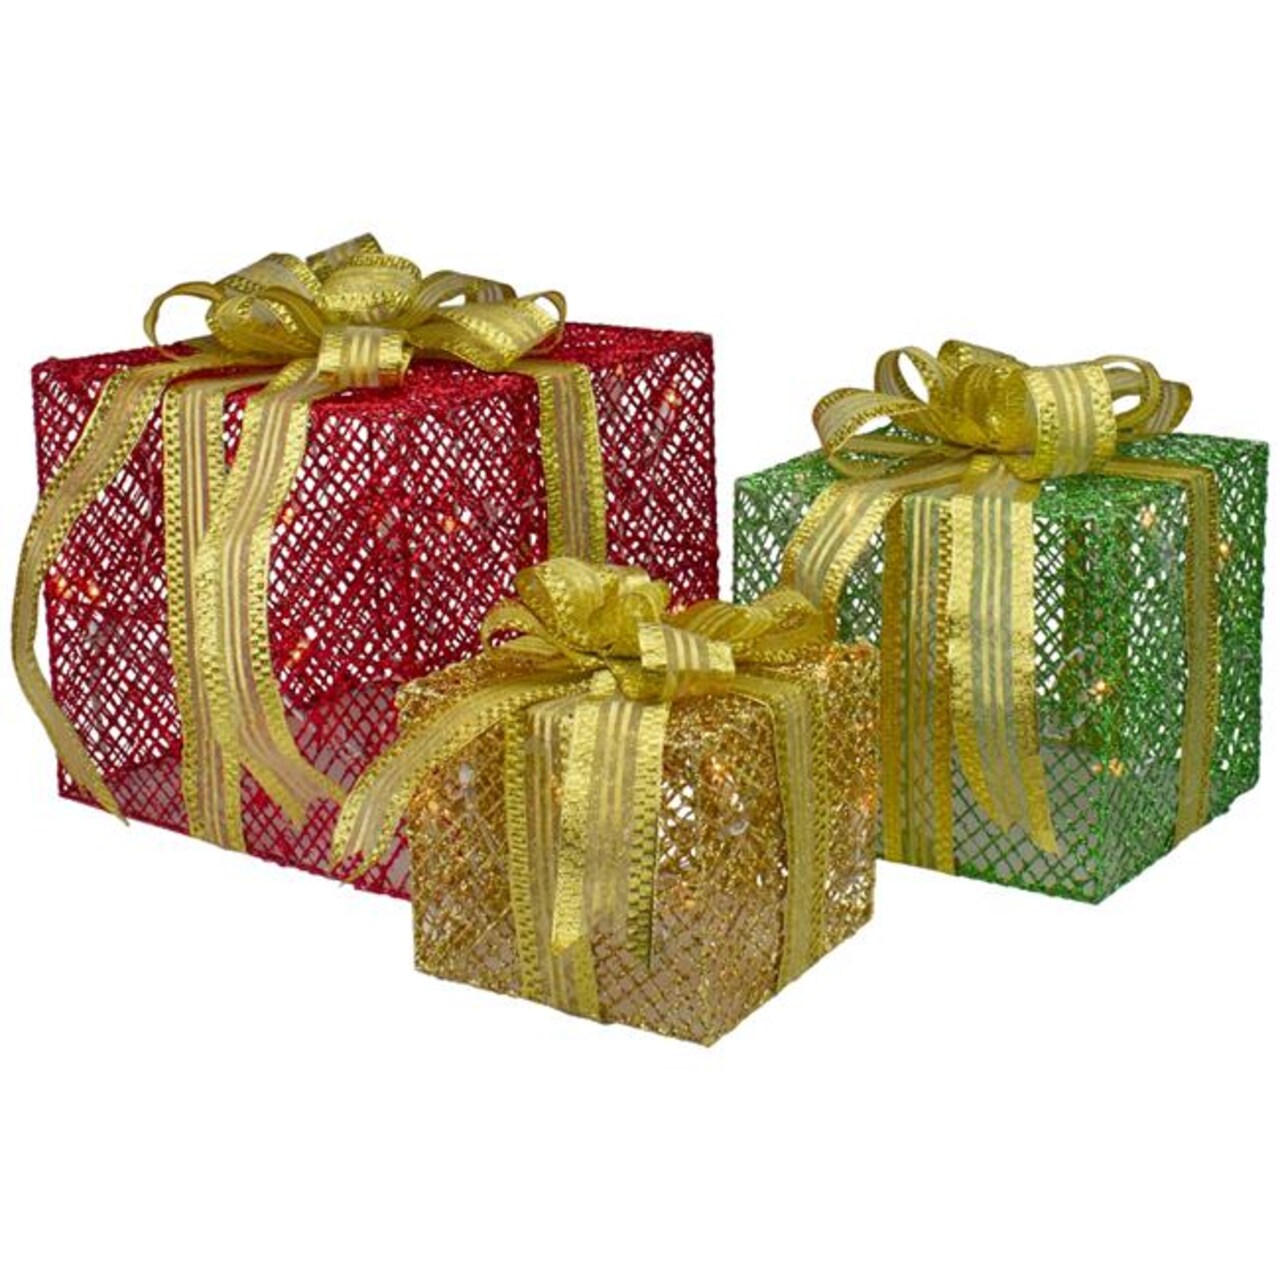 Northlight 34859993 LED Lighted Glitter Gift Boxes Outdoor Christmas Decoration, Red, Green &#x26; Gold - Set of 3